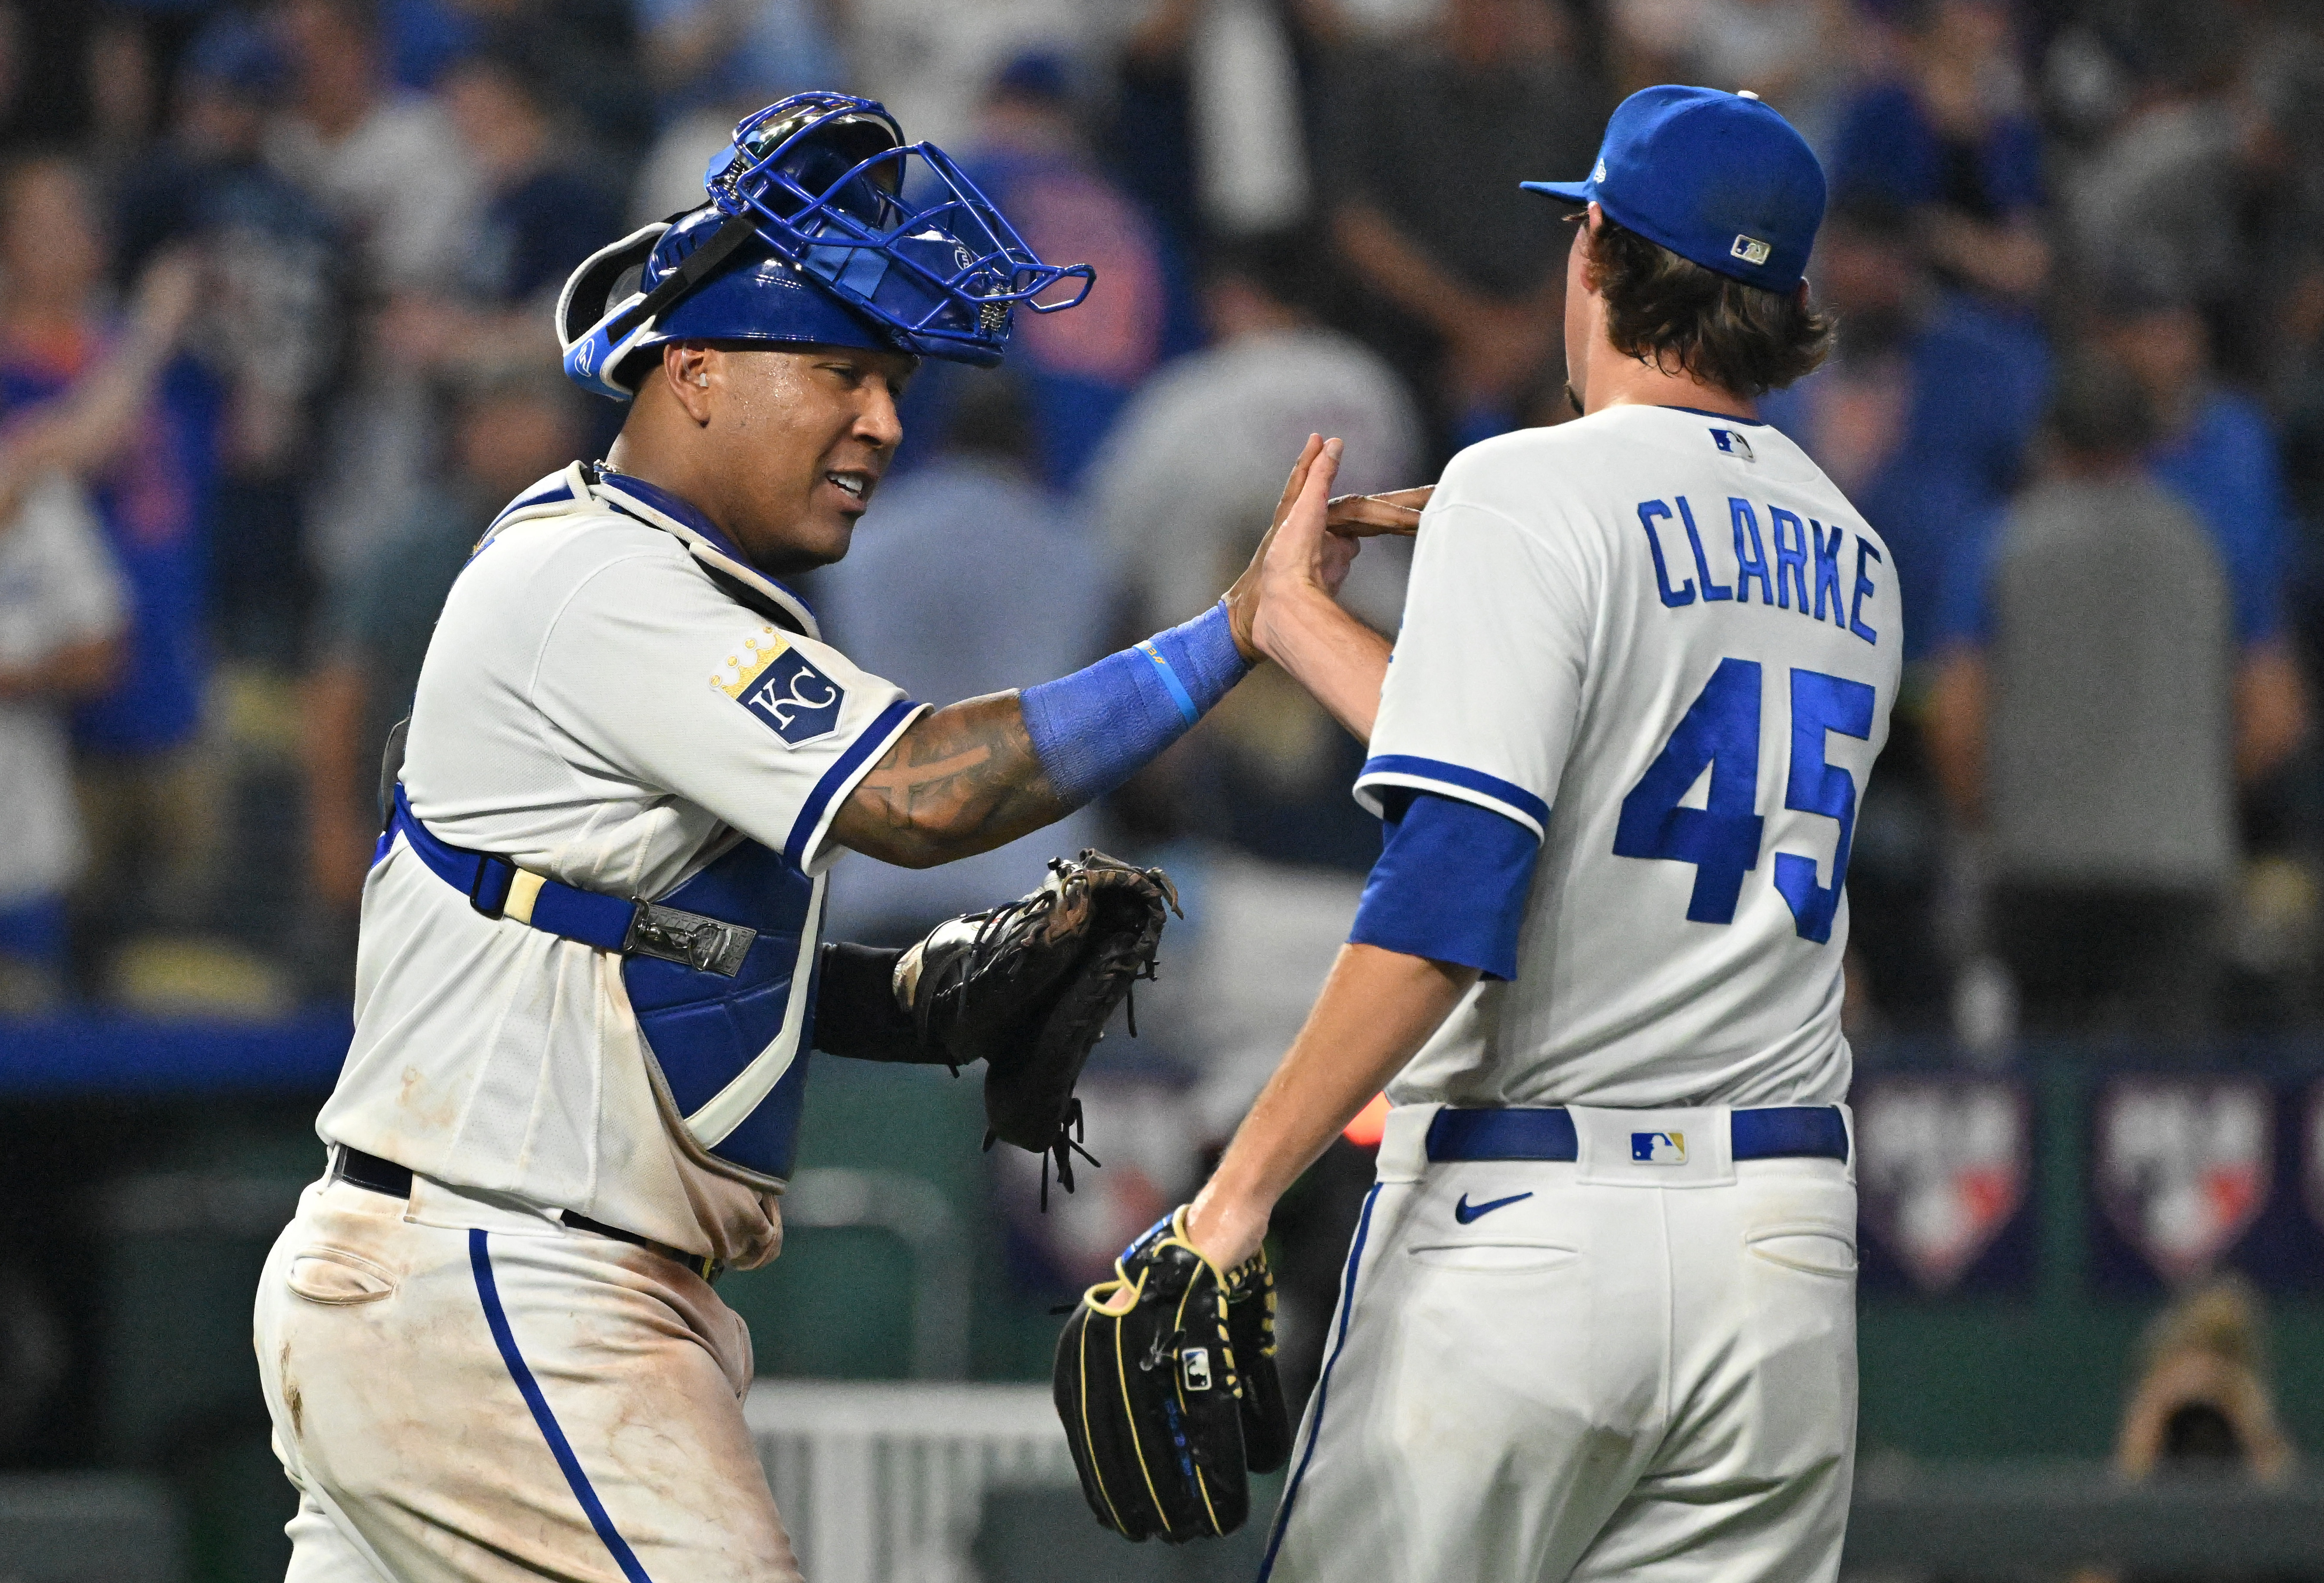 Royals win series over Dodgers - The Iola Register